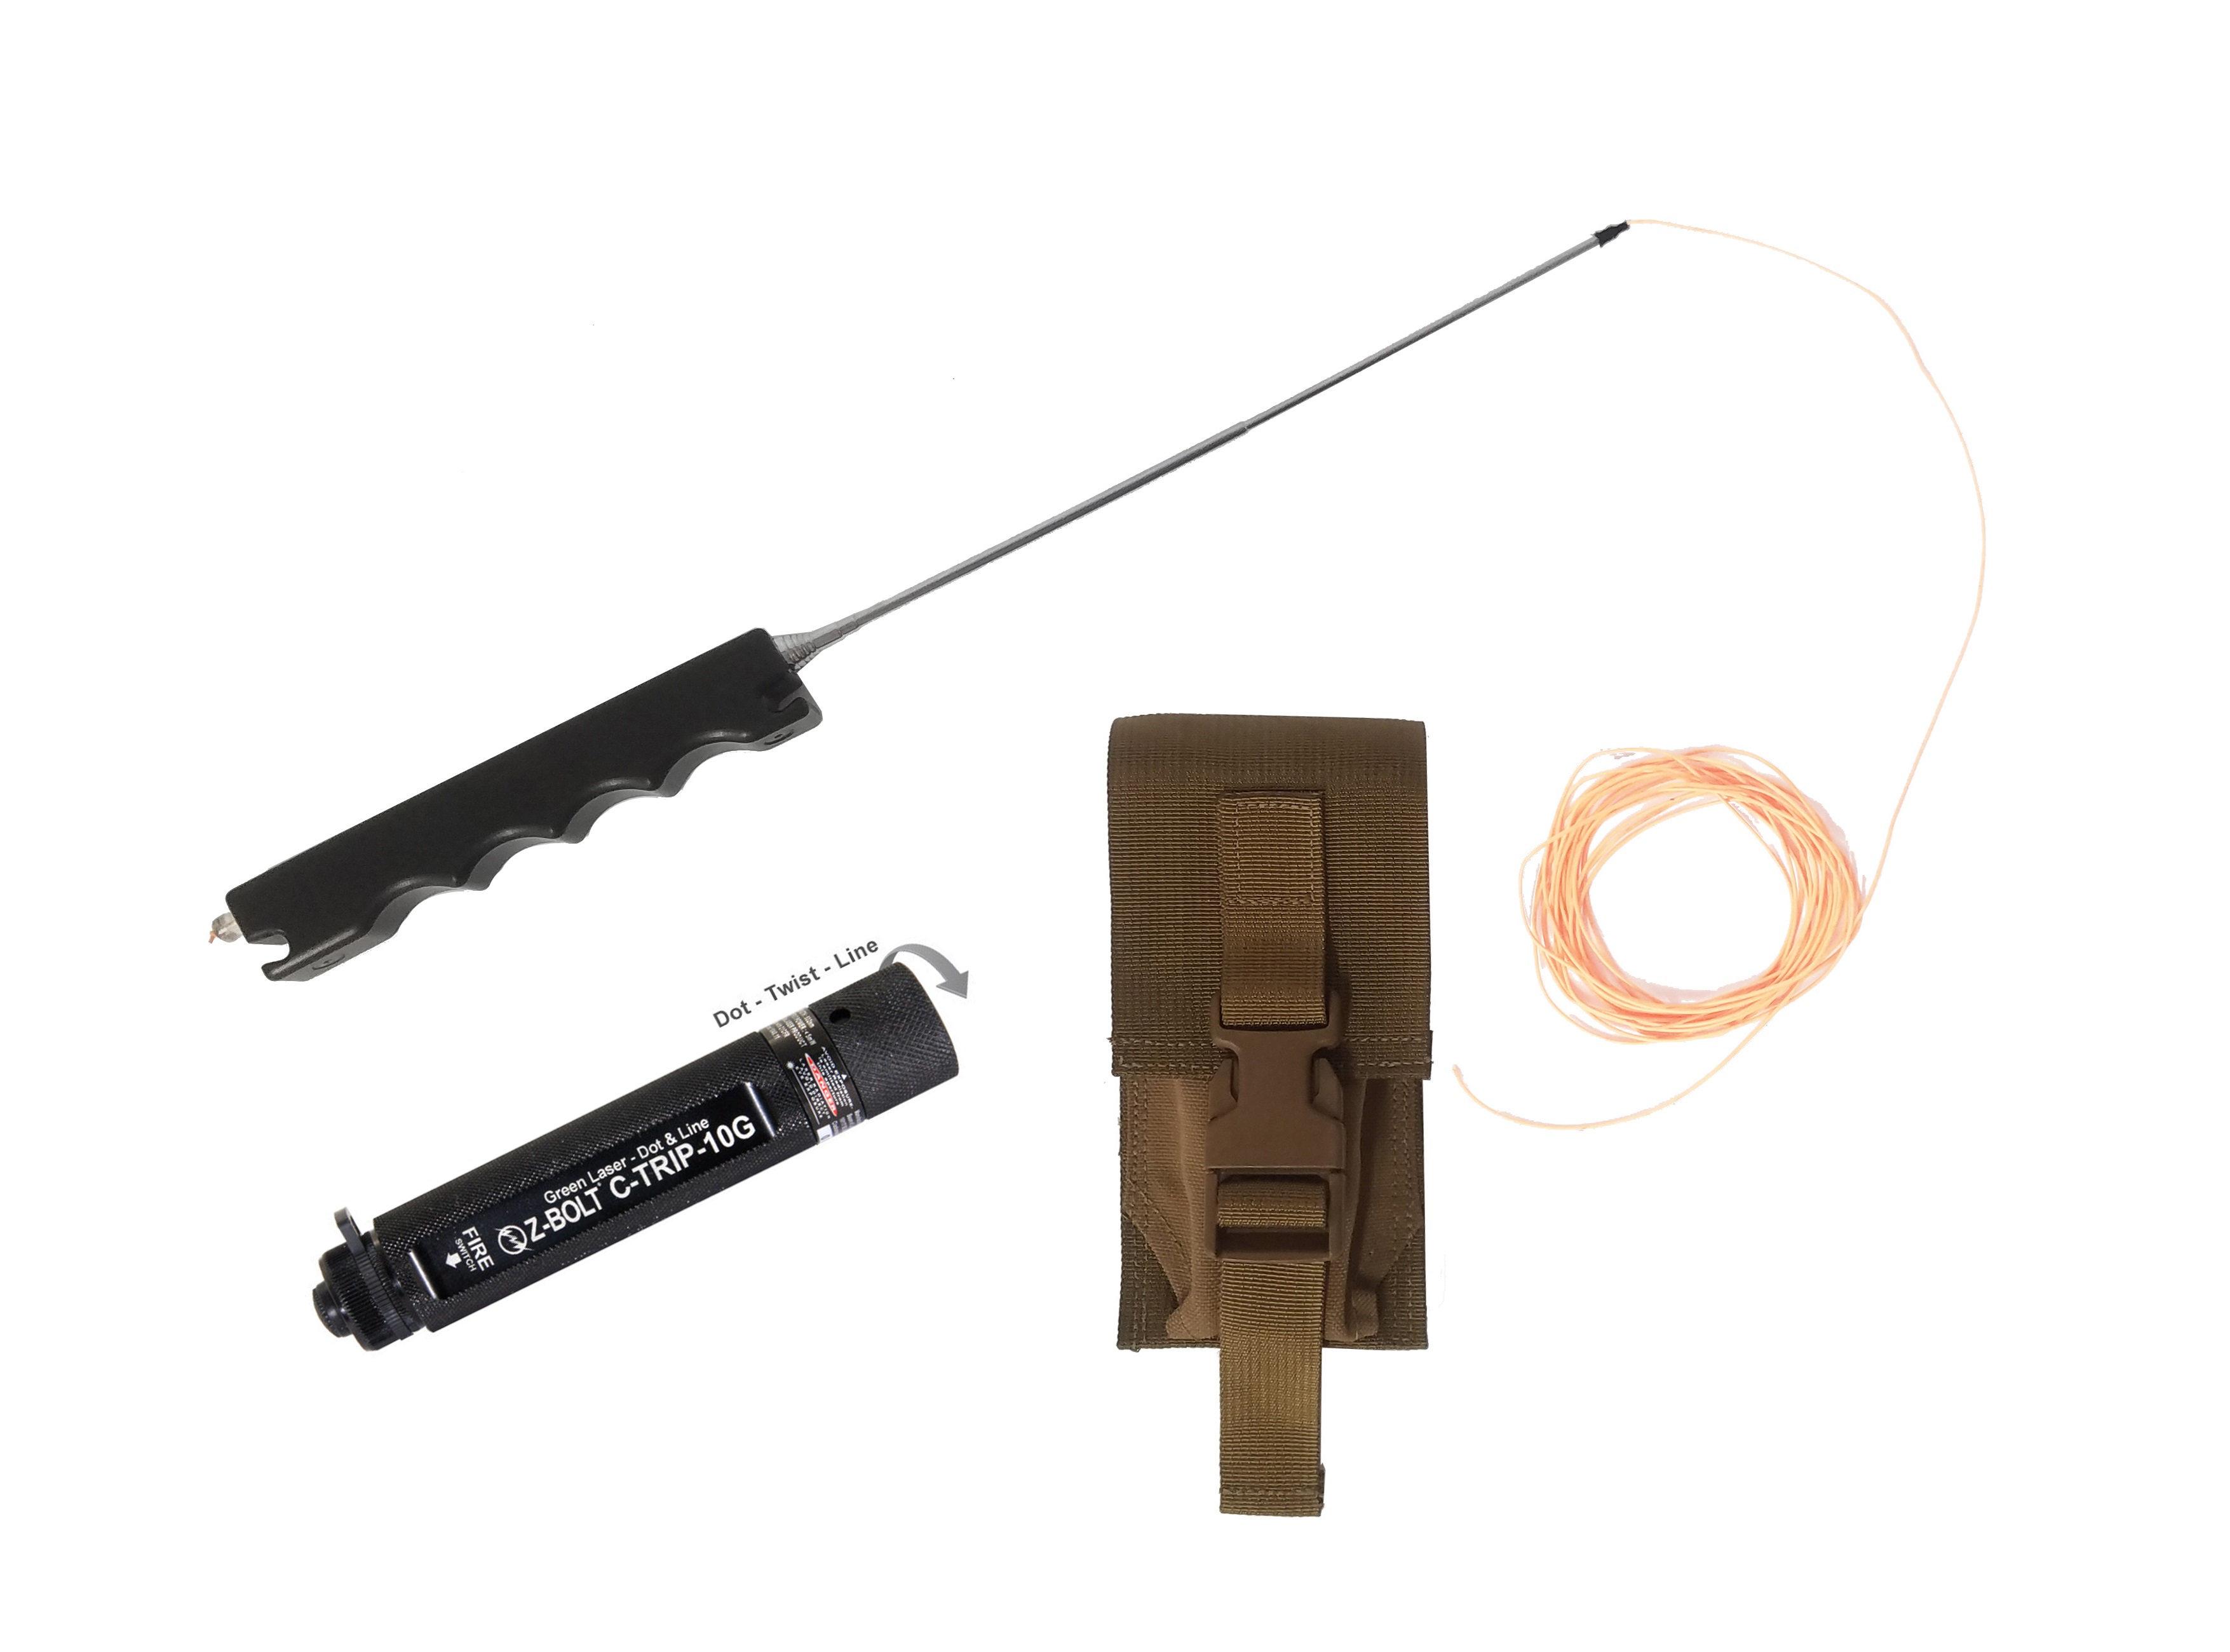 MithiX Pro » Trip Wire Detector with Visible Laser Identifier Kit